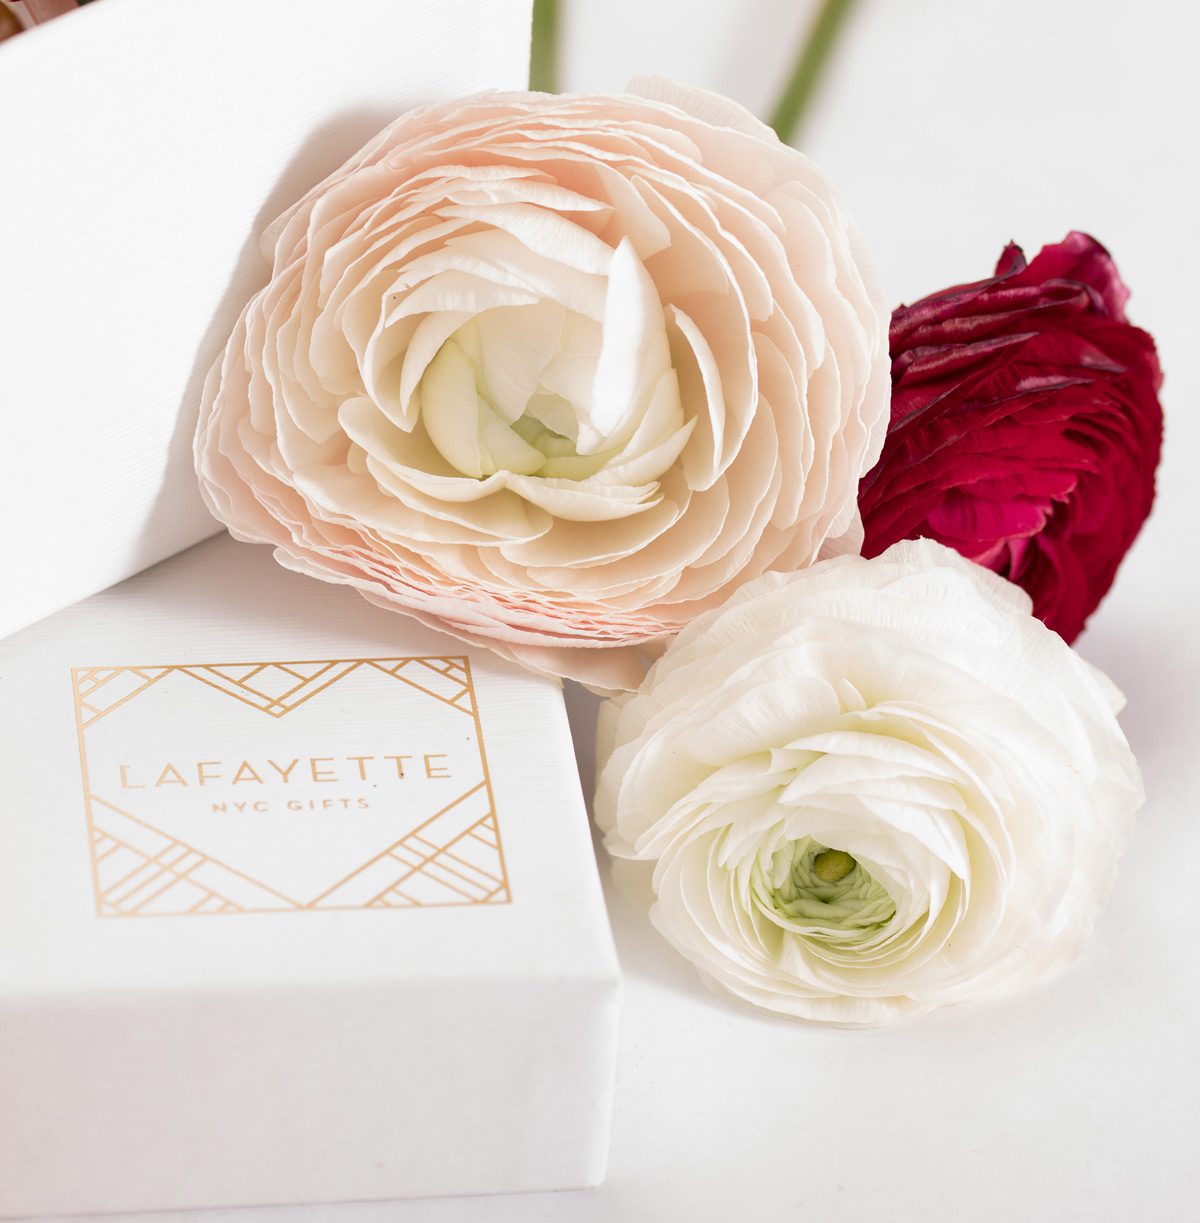 A photograph of a Lafayette Gift box with flowers